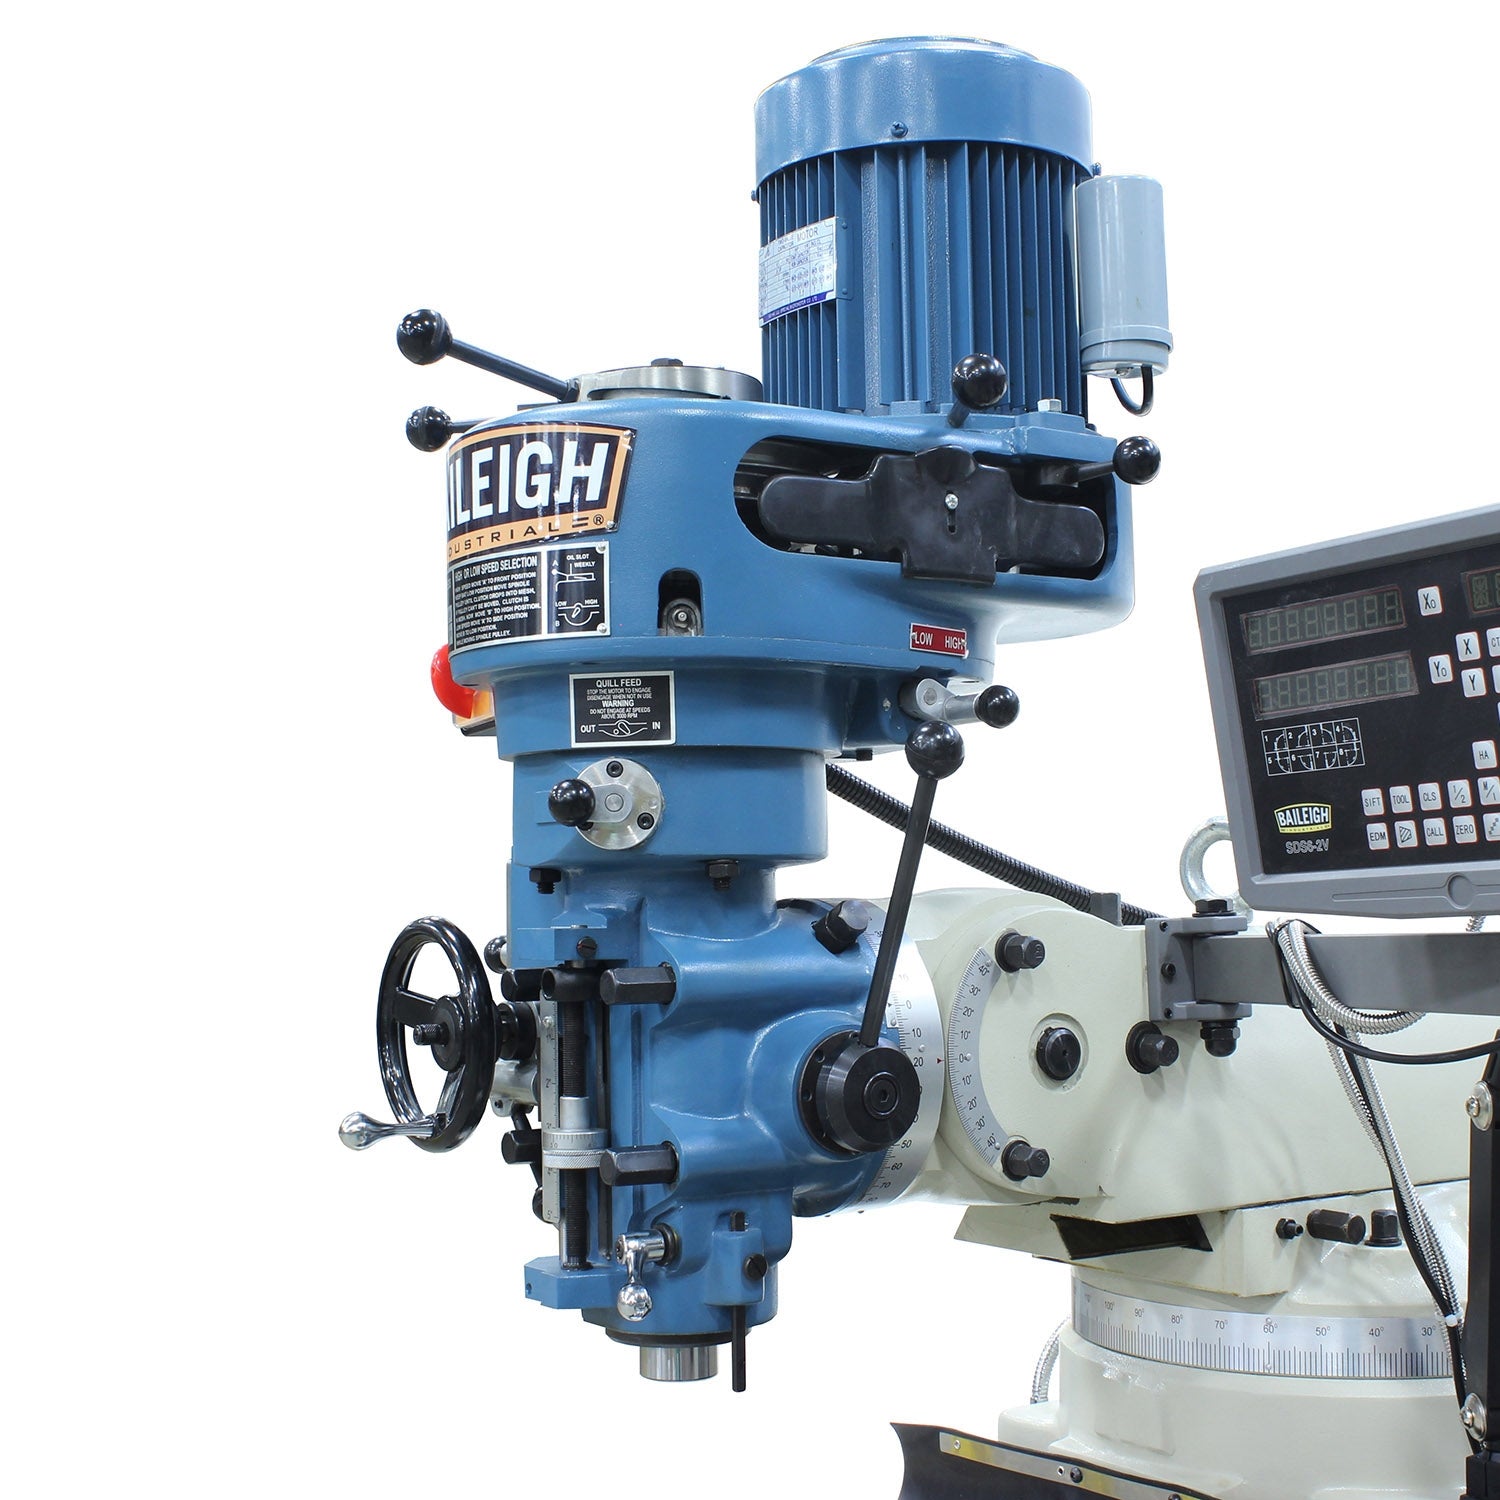 Baileigh VM-942E-1 220V 1 Phase 3HP Vertical Mill, 9" x 42" Table, 8 Speed, Includes R8 Spindle, Coolant, Work Light, X&Y DRO